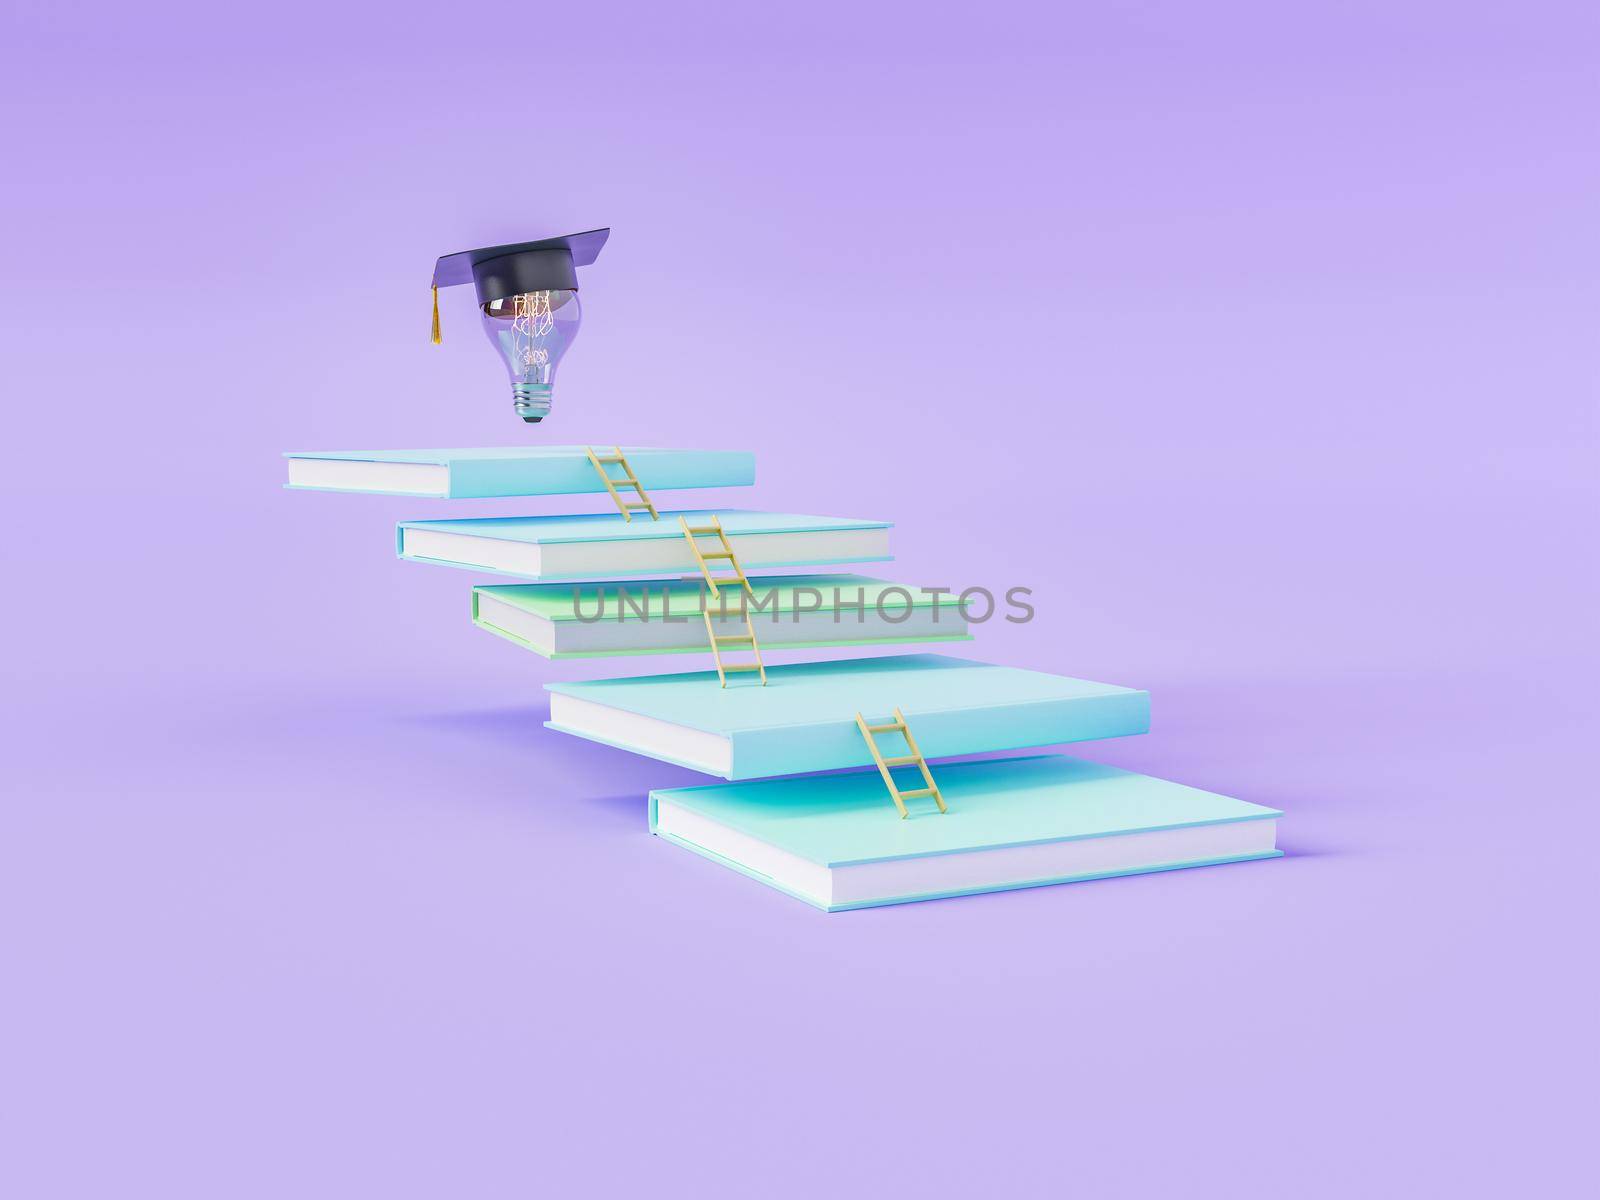 3d illustration of stack of books with little ladders and light bulb in graduation hat on top against violet background